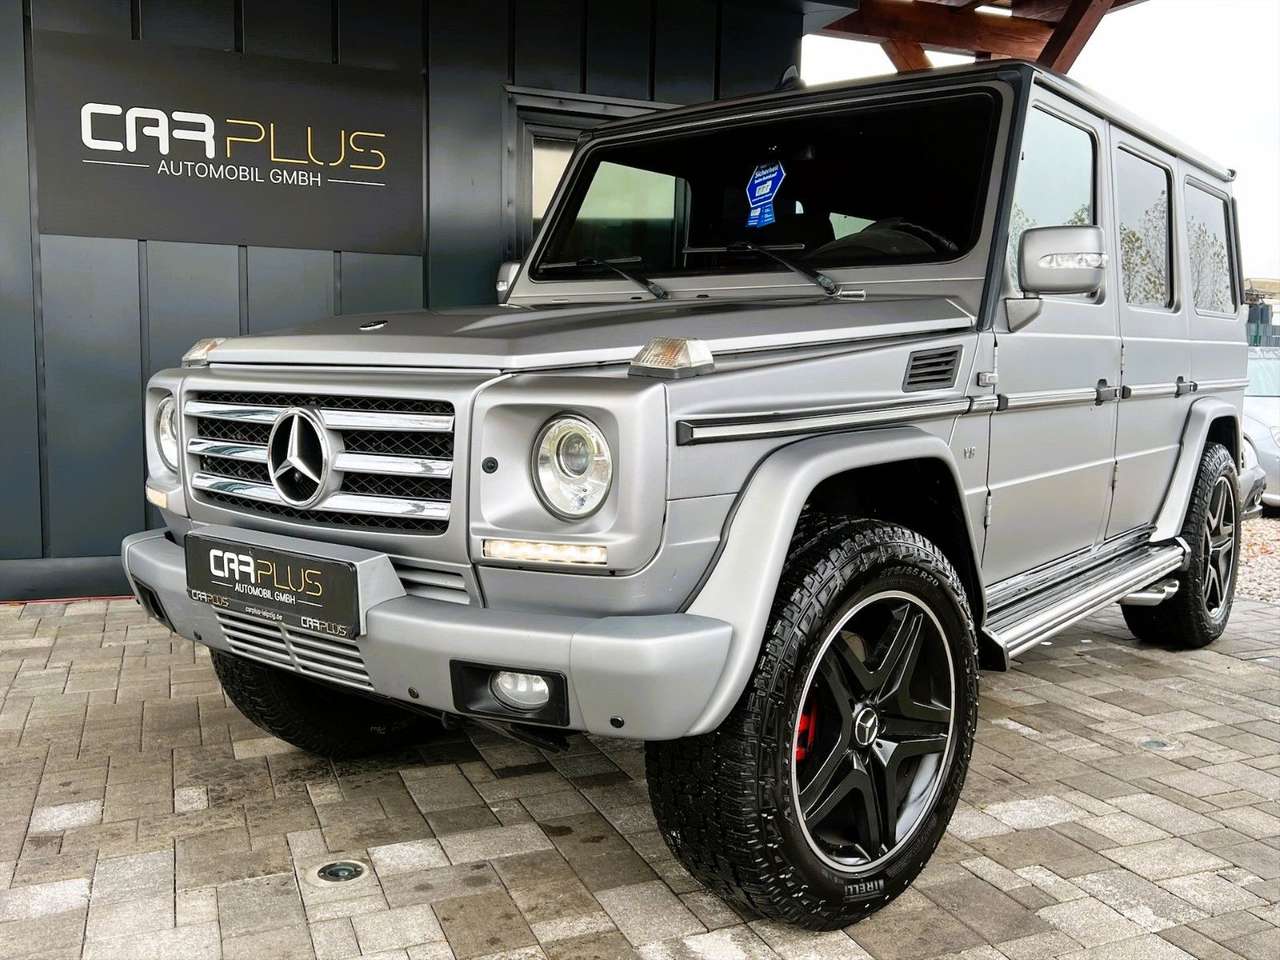 Used Mercedes Benz G-Class 400 CDI